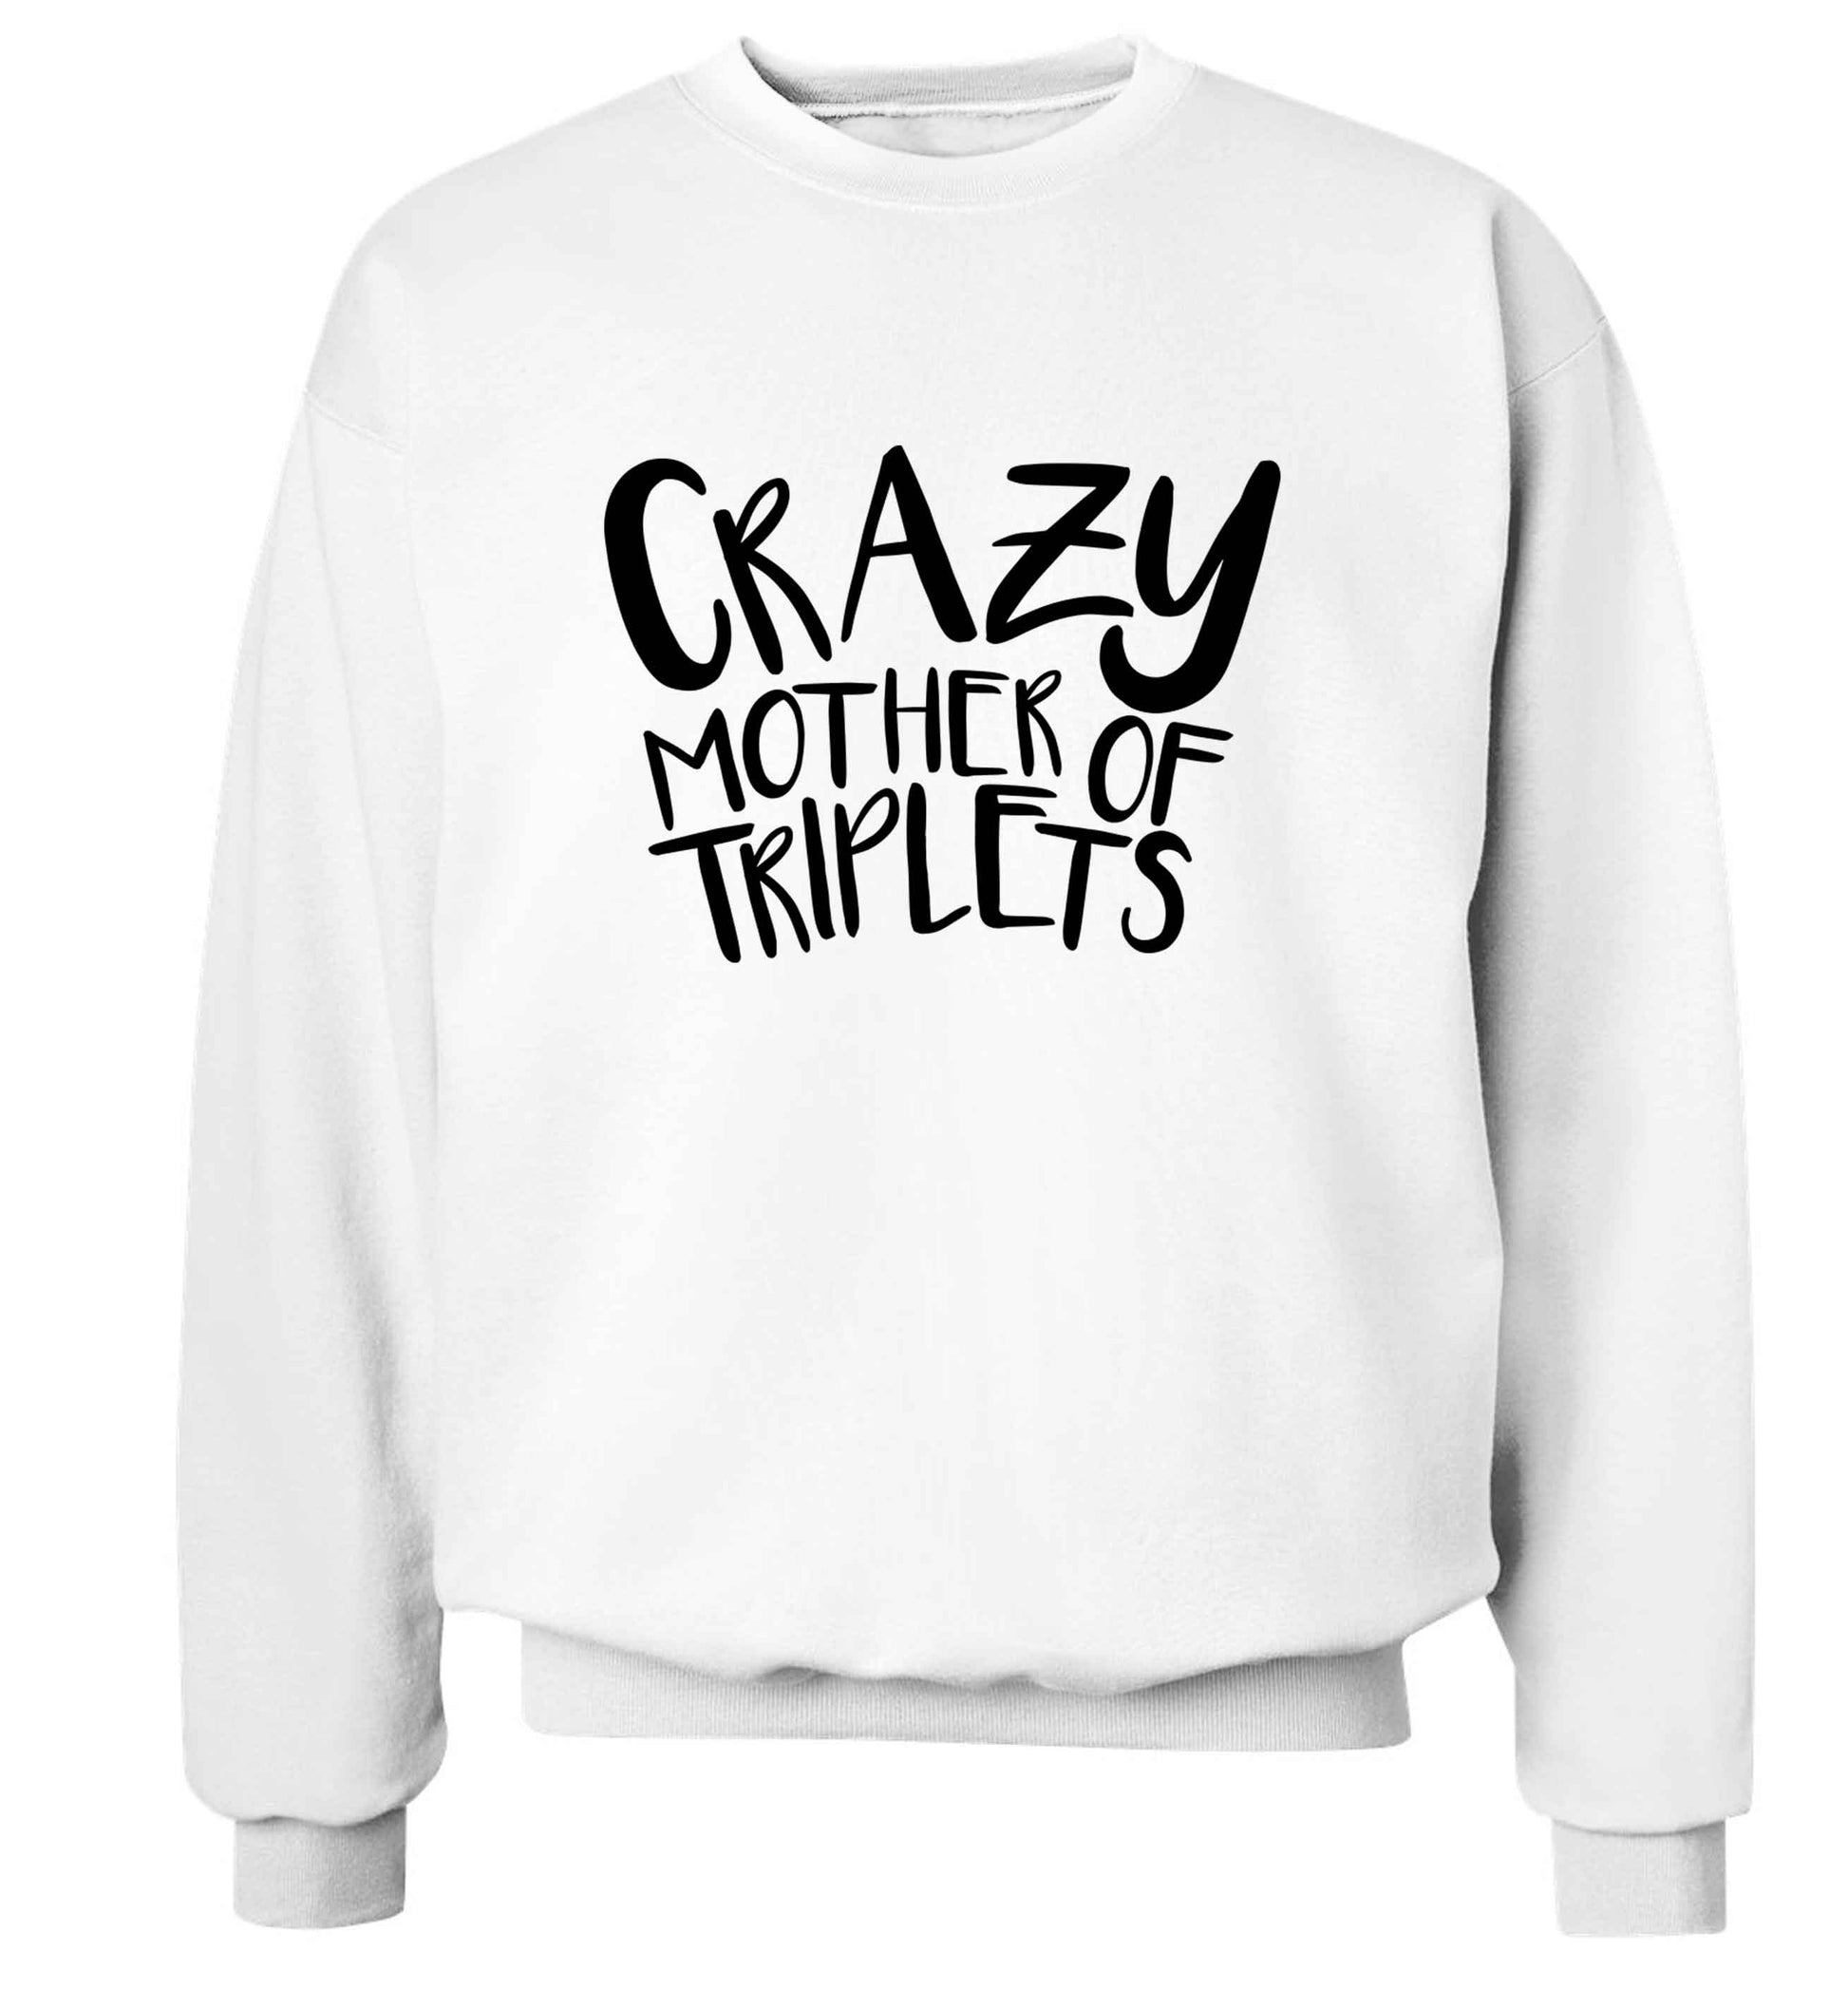 Crazy mother of triplets adult's unisex white sweater 2XL